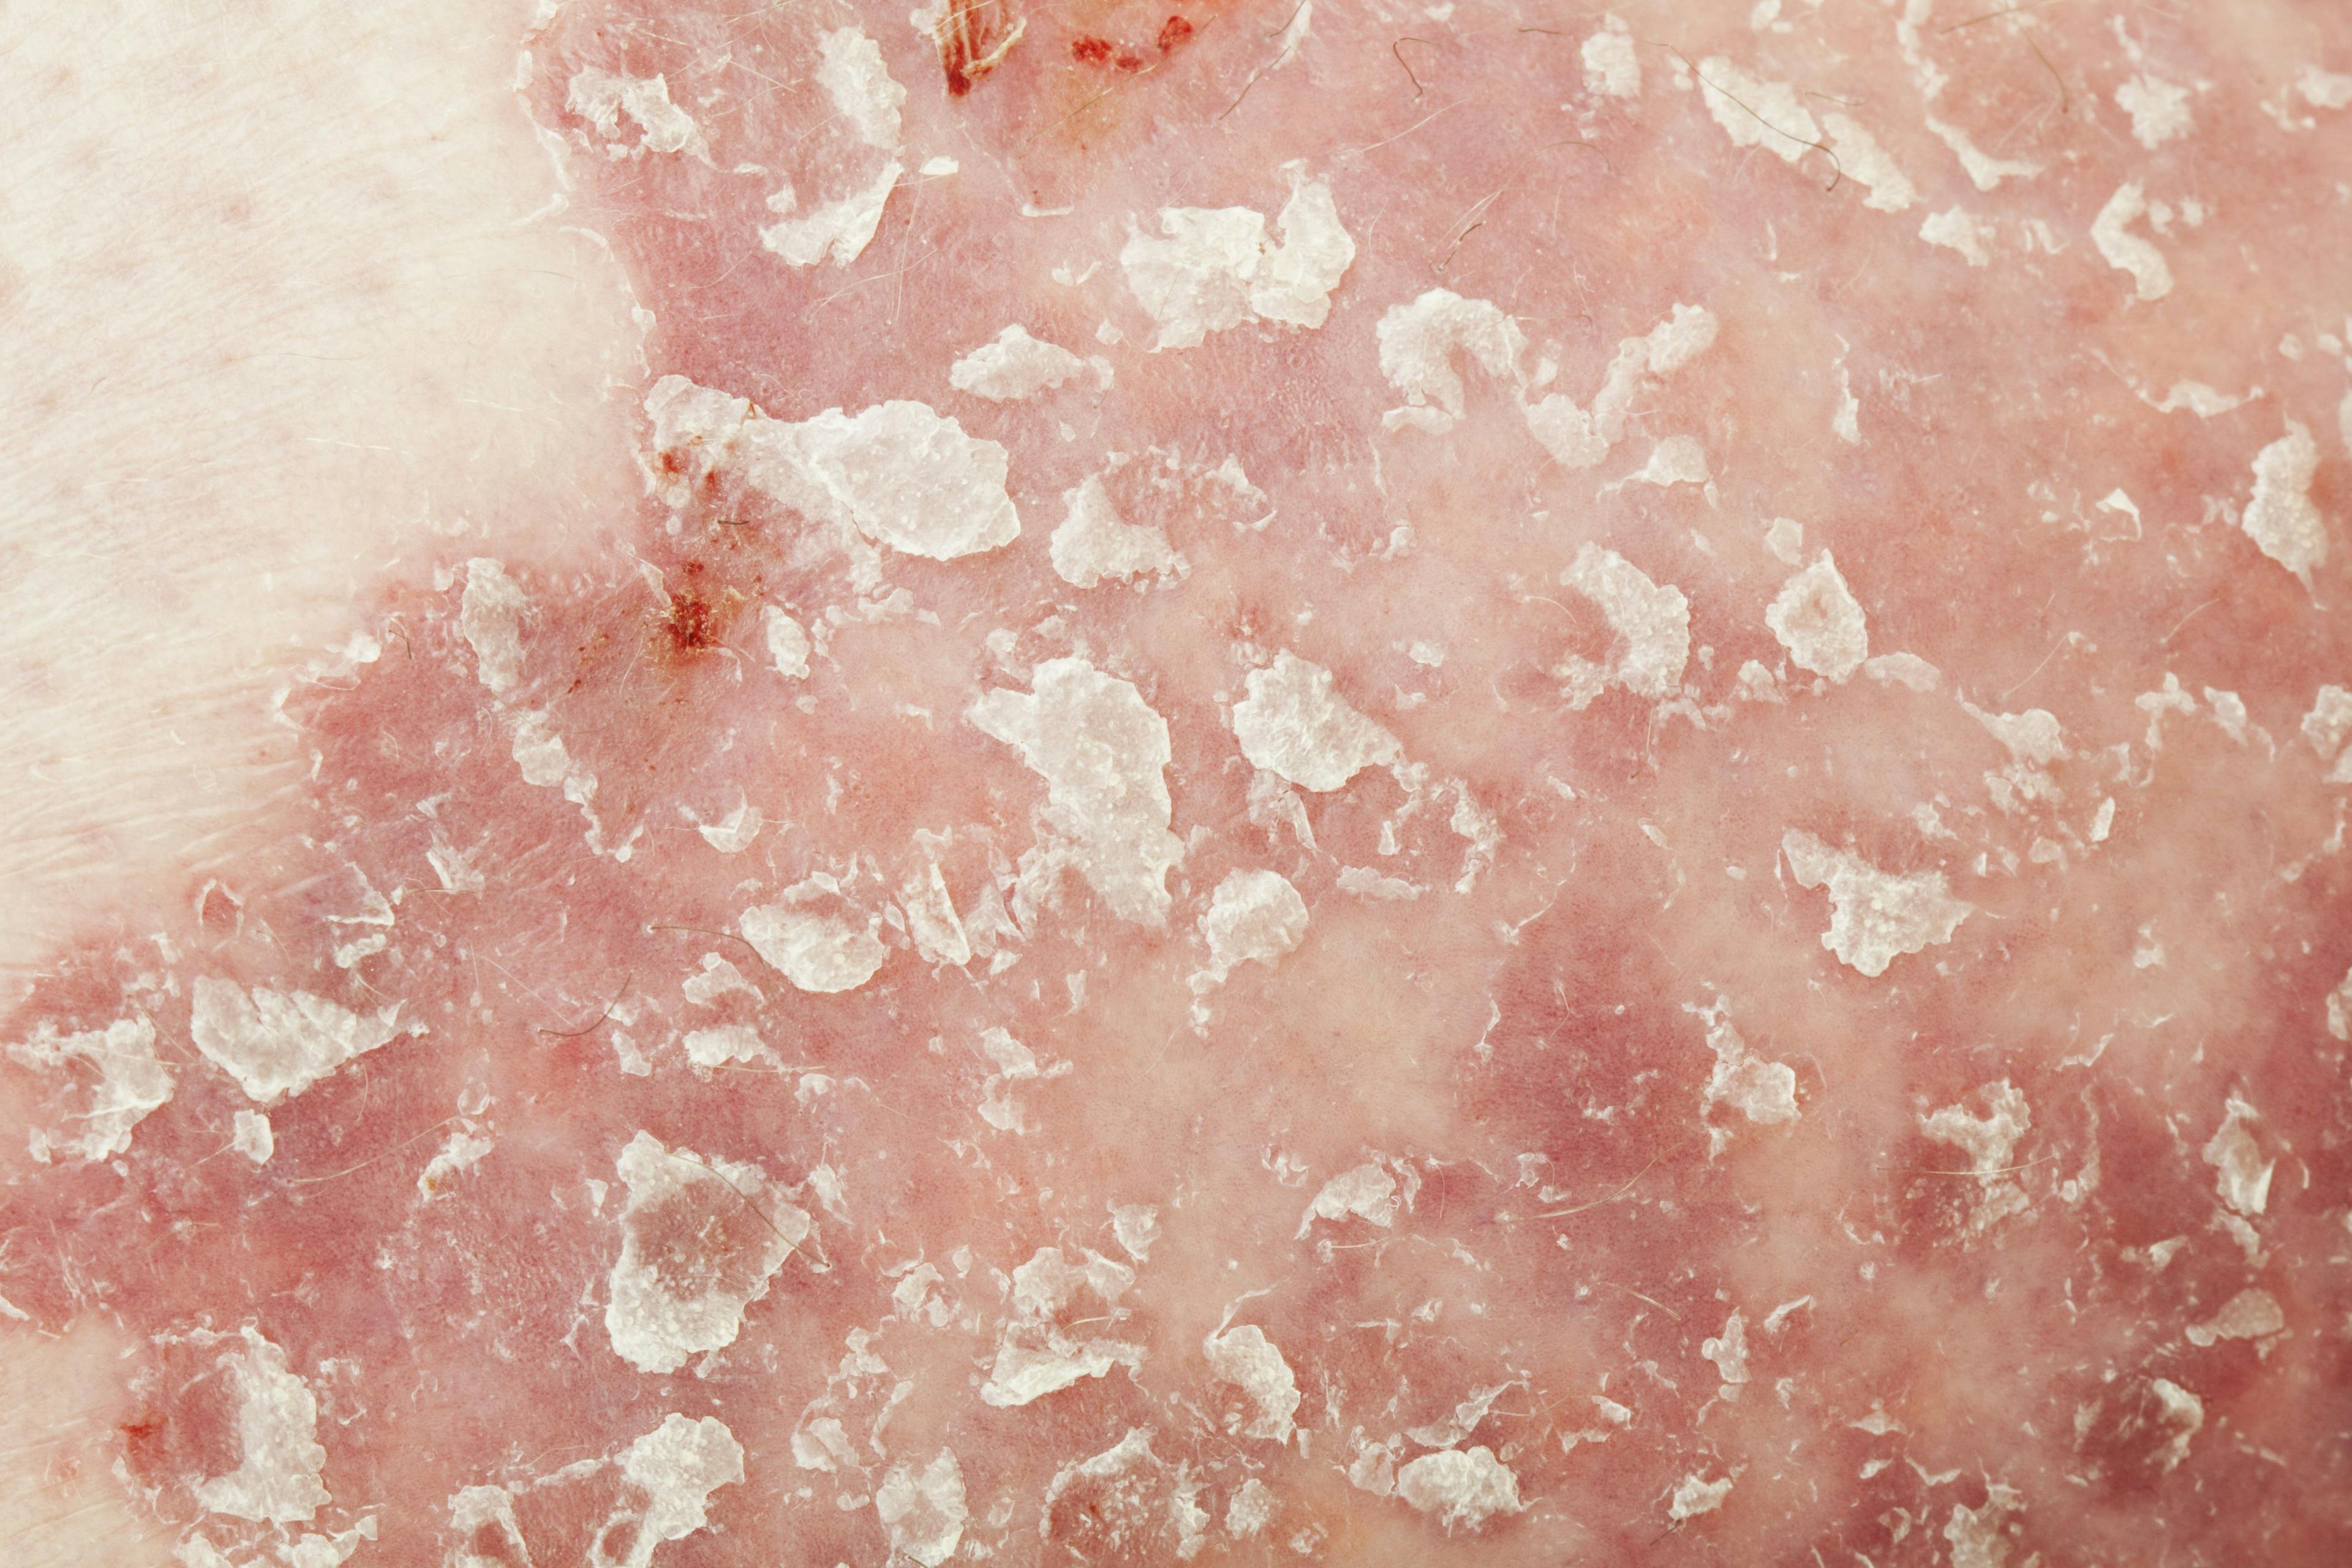 Patch Effective in Extracting Transcriptomes for Precision Medicine in Psoriasis